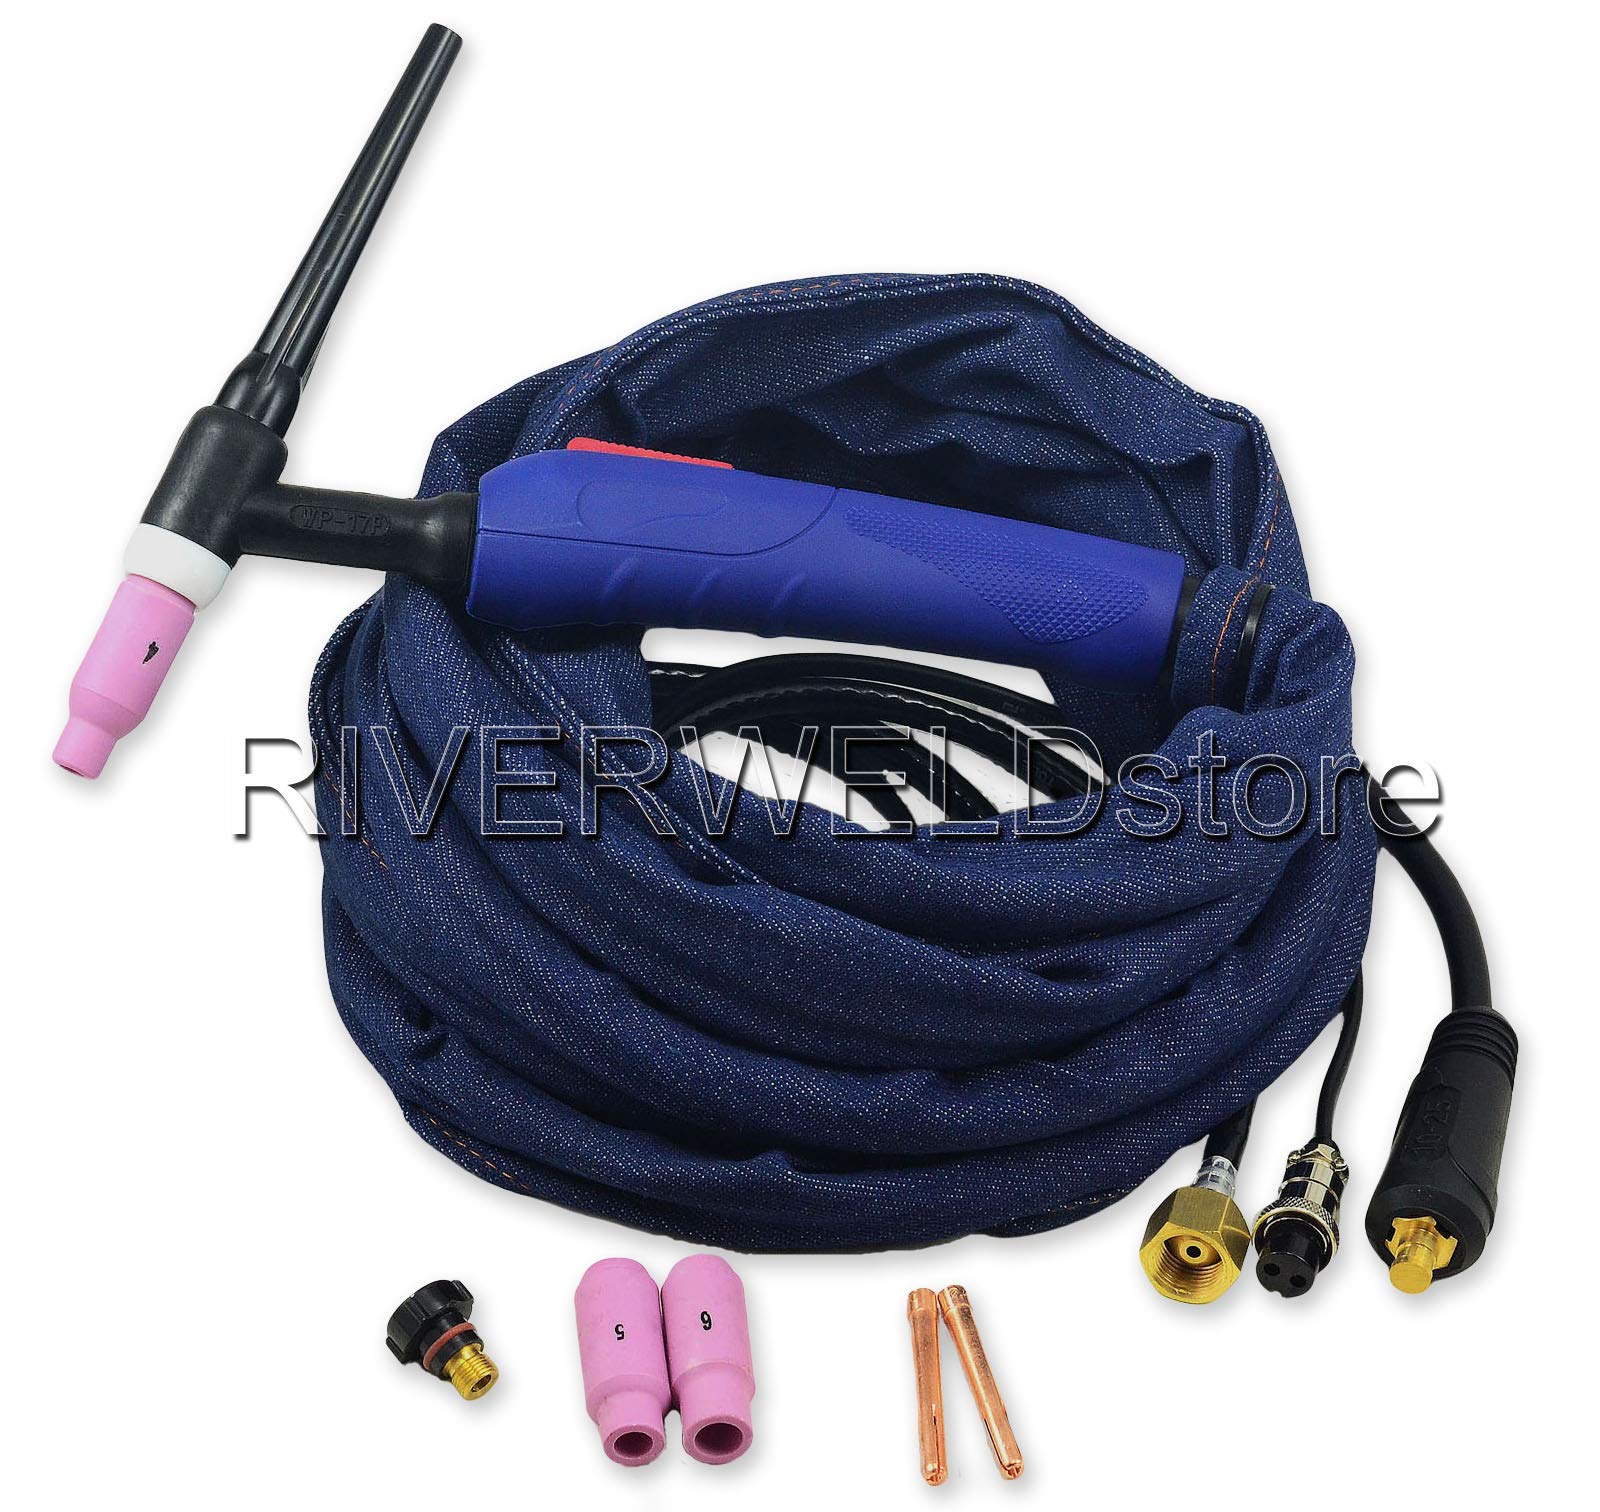 WP 17 SR17 12 Feet 150Amp Air-Cooled Tig Welding Torch Complete (17F 12Ft)